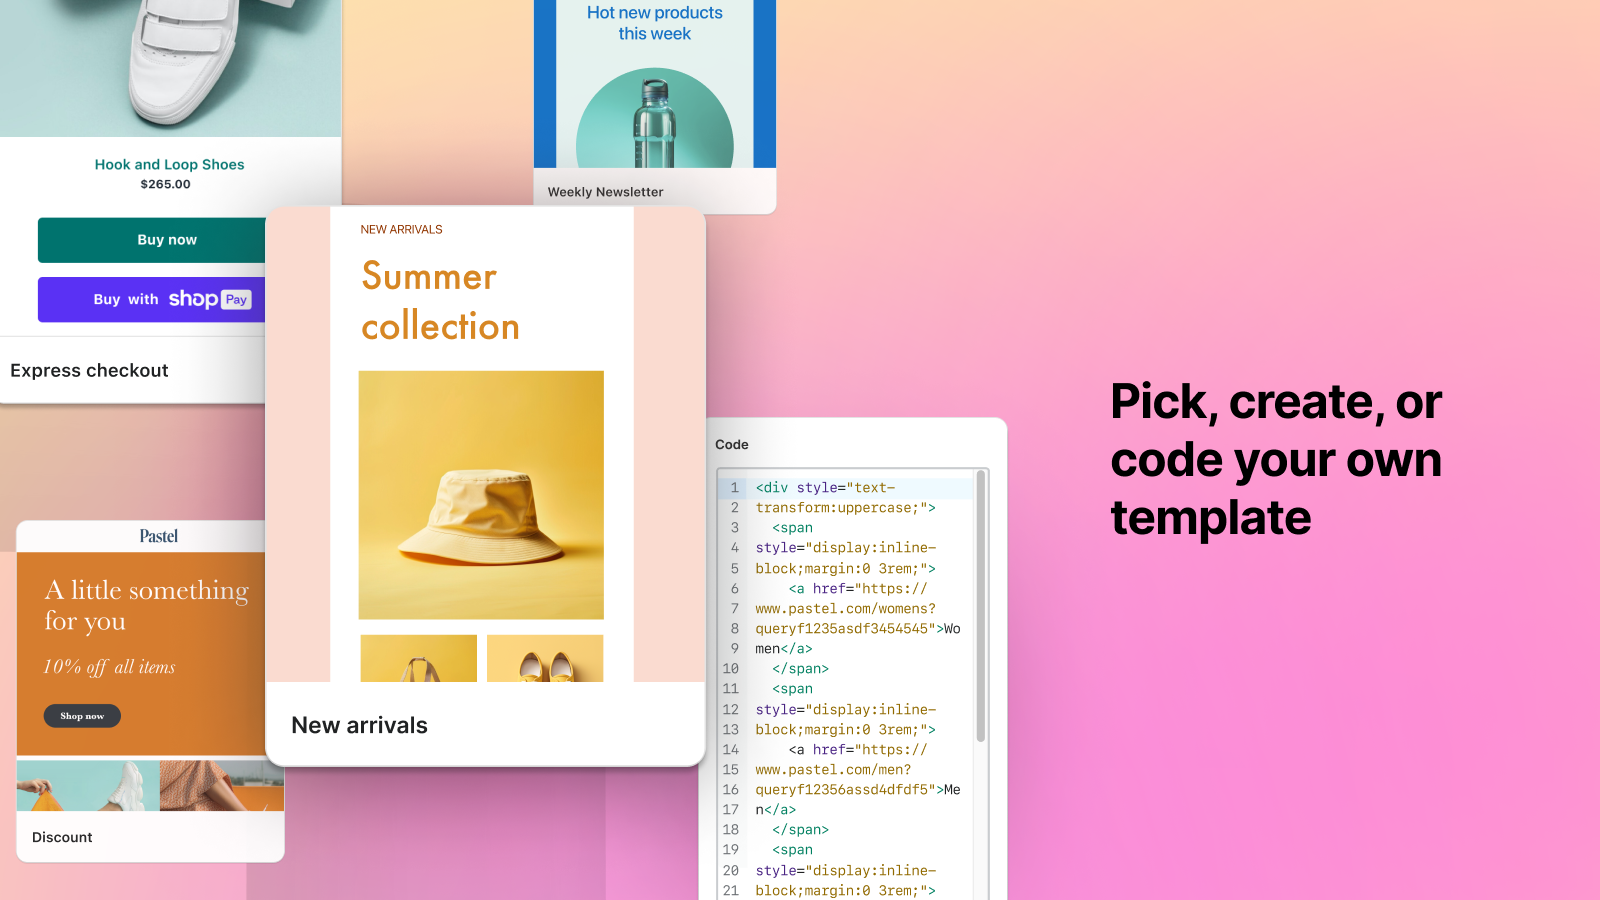 Pick, create or code your own template